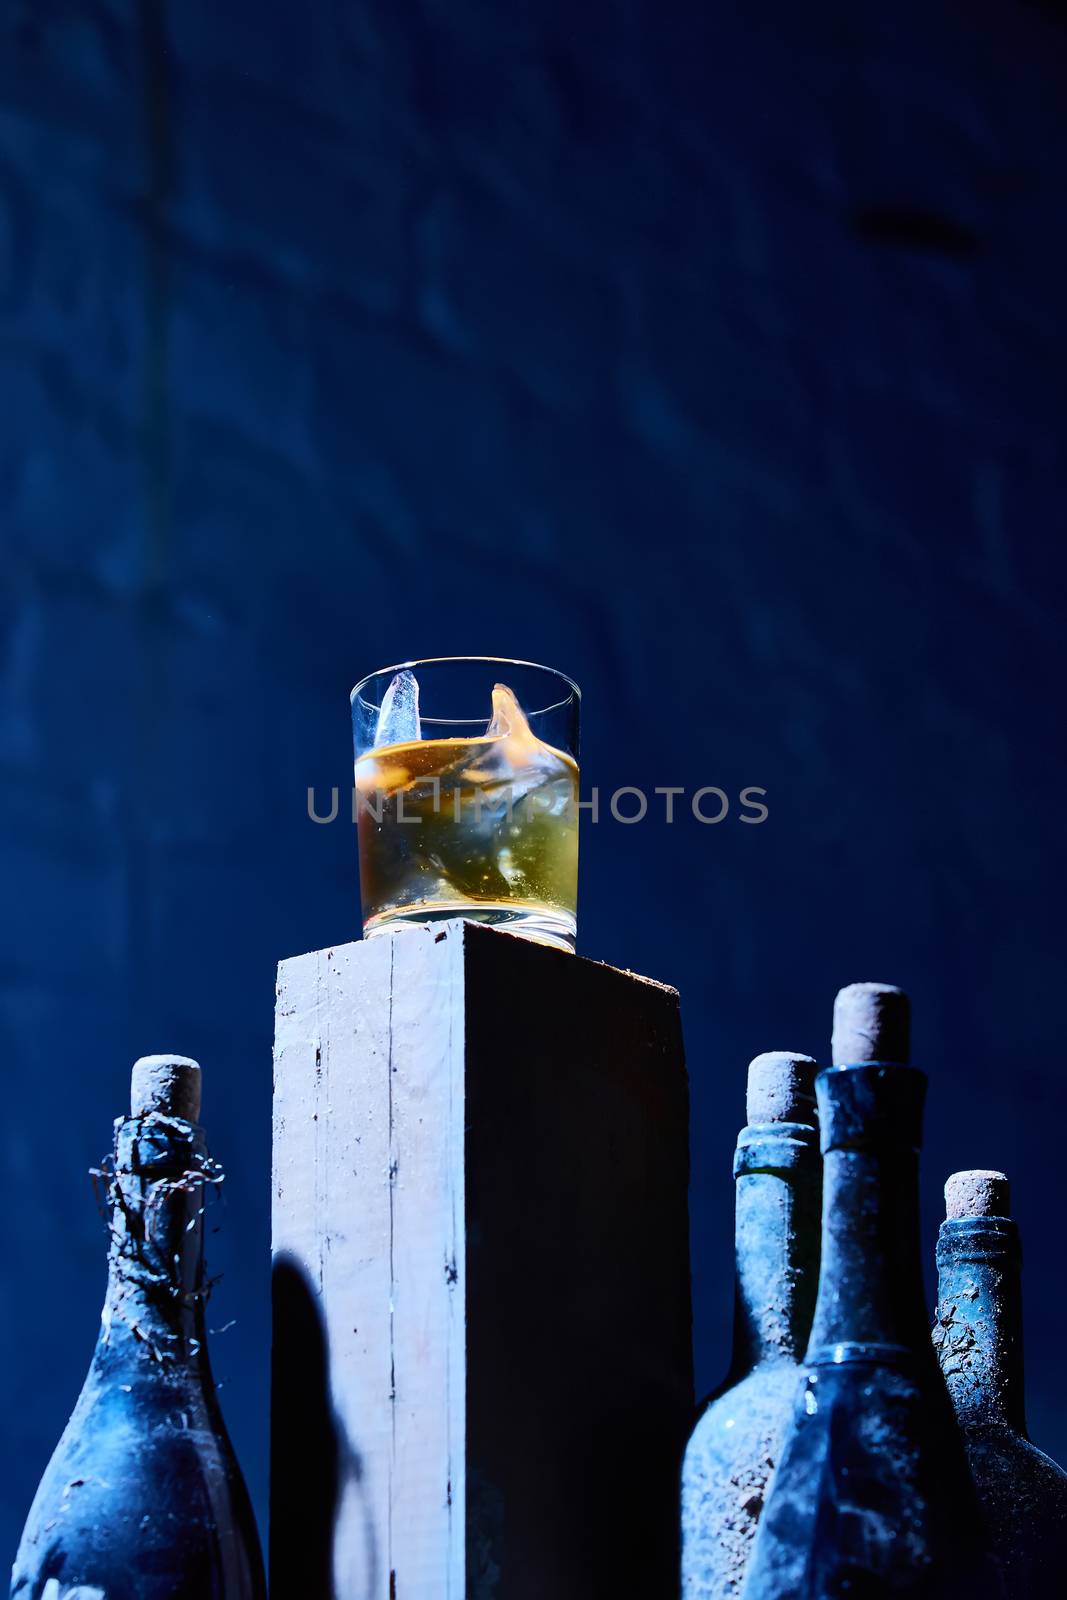 A glass of whiskey with ice on old wooden bar around the old bottles. Shallow dof. The blue tones